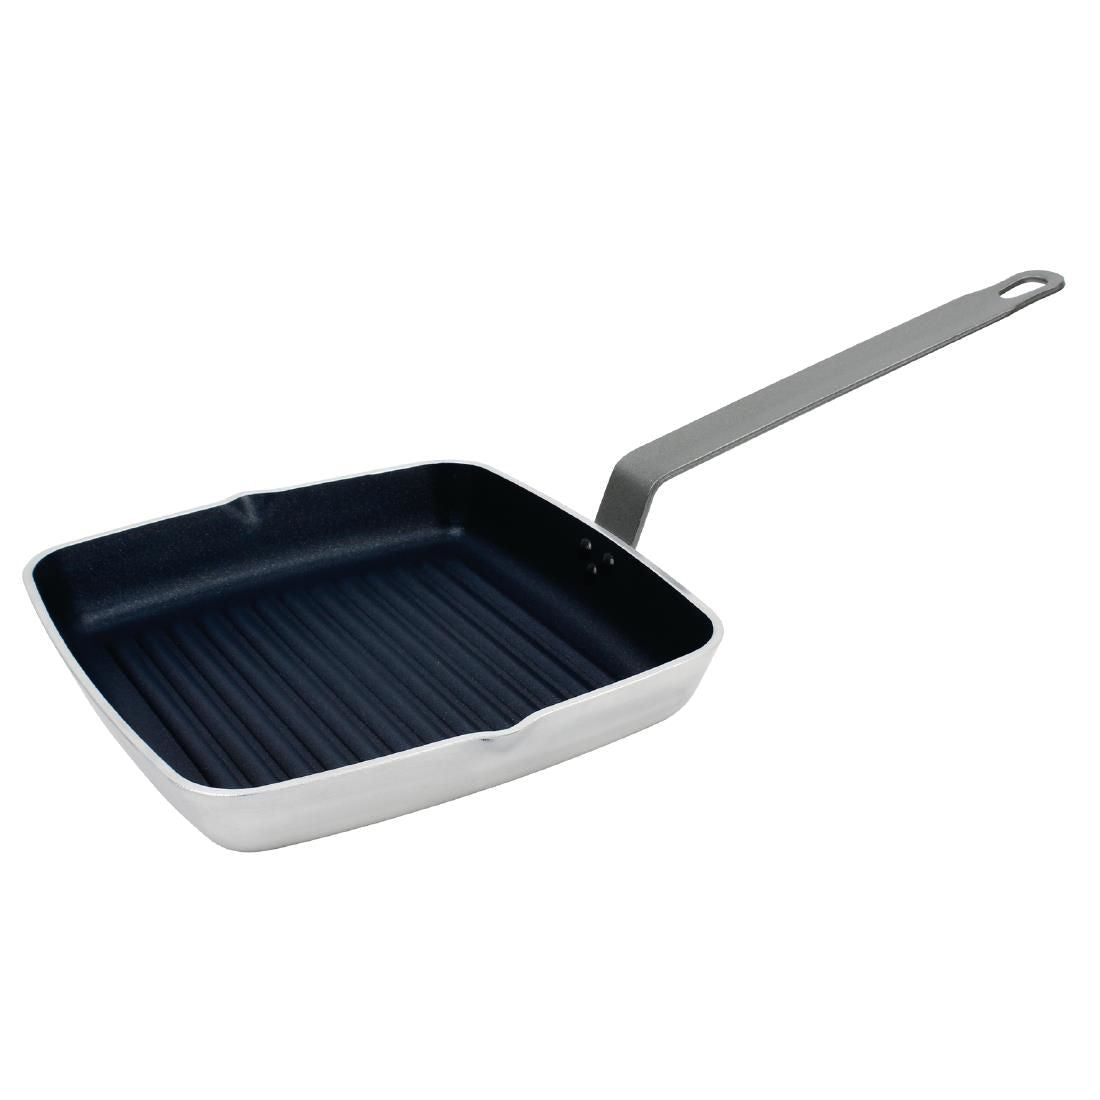 DL942 Vogue Square Non Stick Teflon Ribbed Skillet Pan 240mm JD Catering Equipment Solutions Ltd